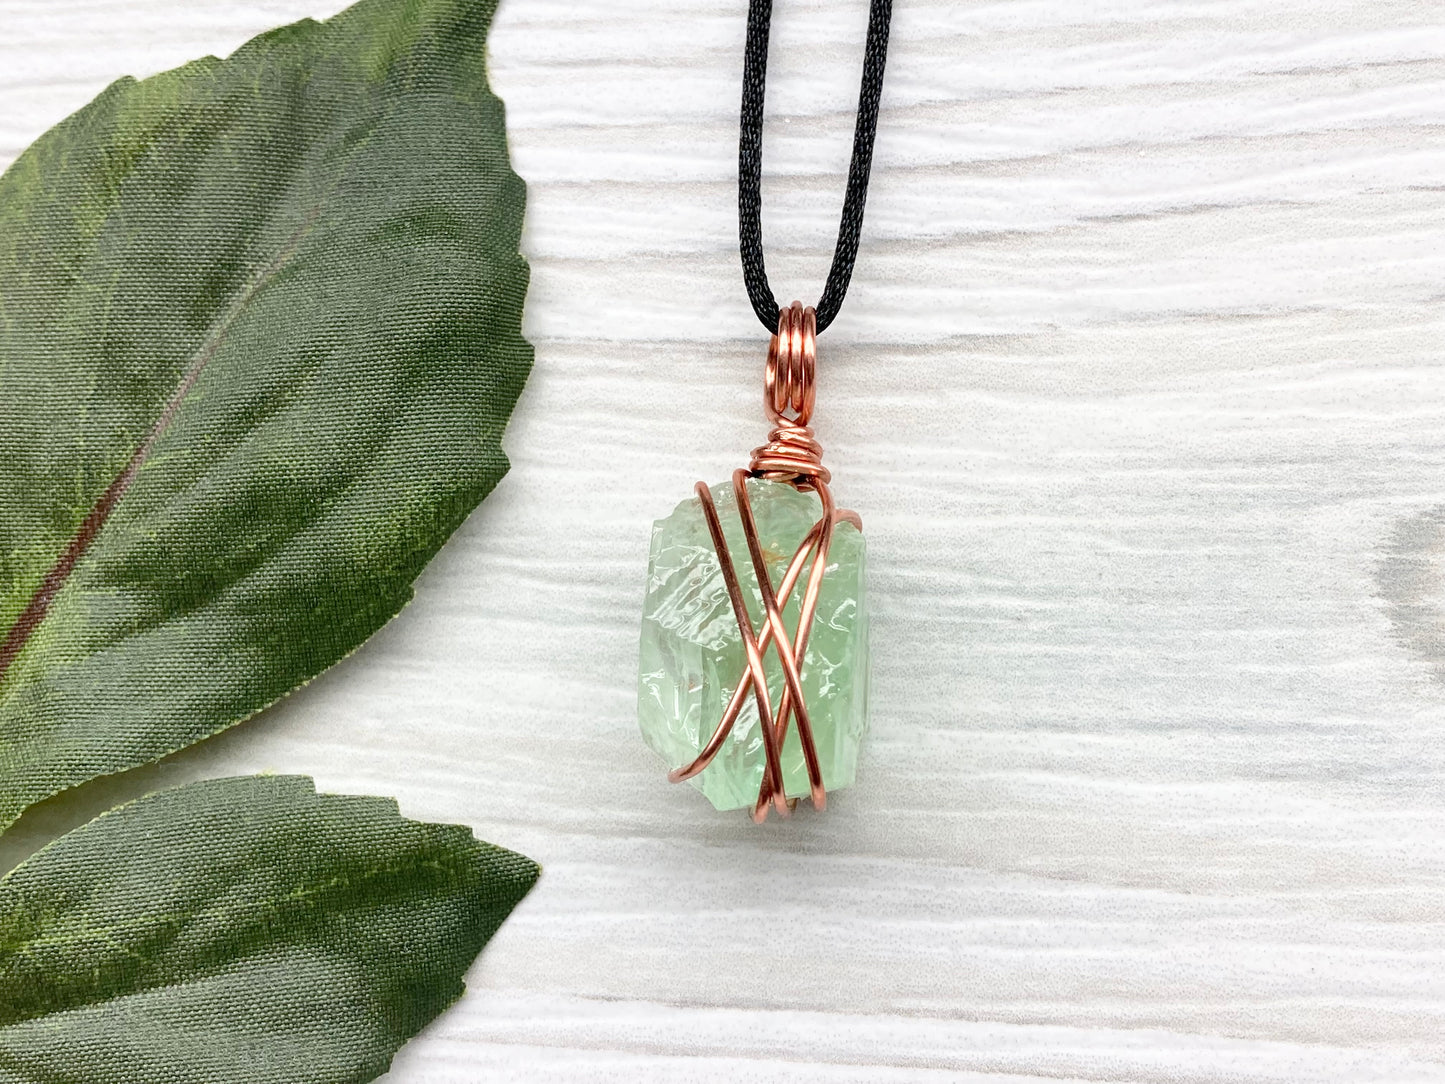 Green Calcite Necklace. Copper Wire Wrapped Stone Pendant. Raw Light Green Crystal. Comes On A Black Chain. Hand Crafted Metaphysical Jewelry For Him Or Her.